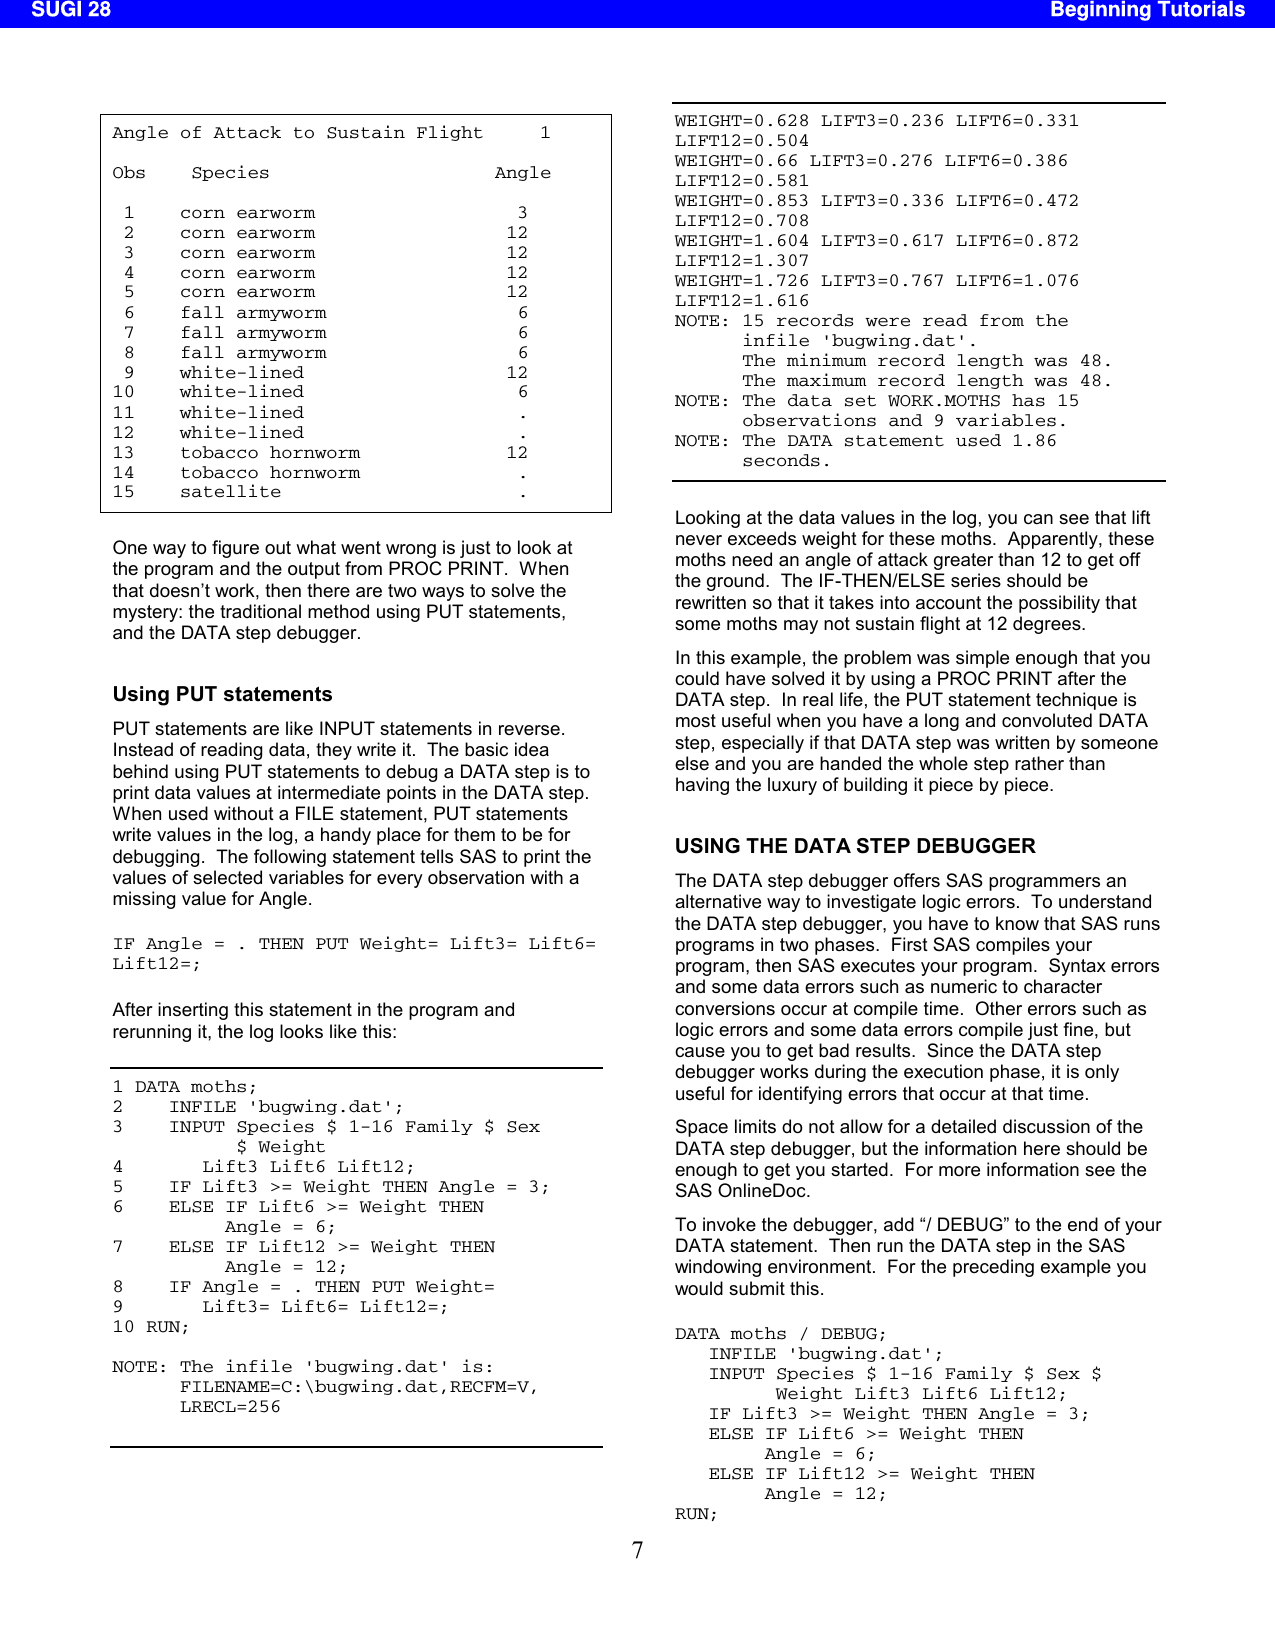 Page 7 of 10 - SUGI 28: Errors, Warnings, And Notes (Oh My): A Practical Guide To Debugging SAS(r) Programs